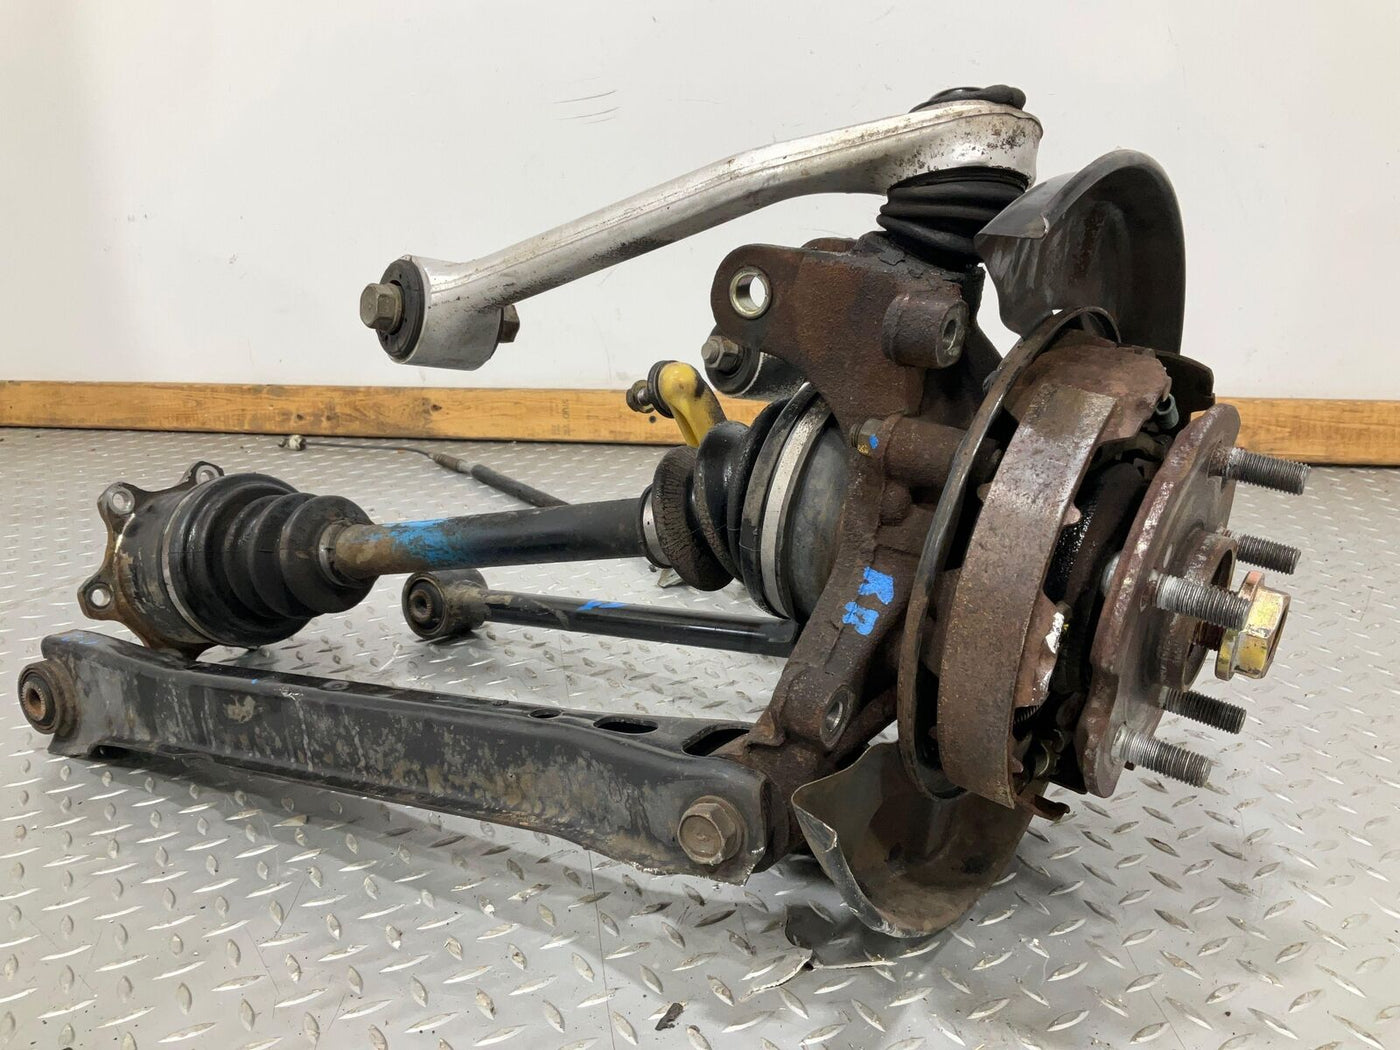 91-93 Toyota Supra MK3 Right RH Pass Rear Spindle W/Control Arms &Axle No Strut